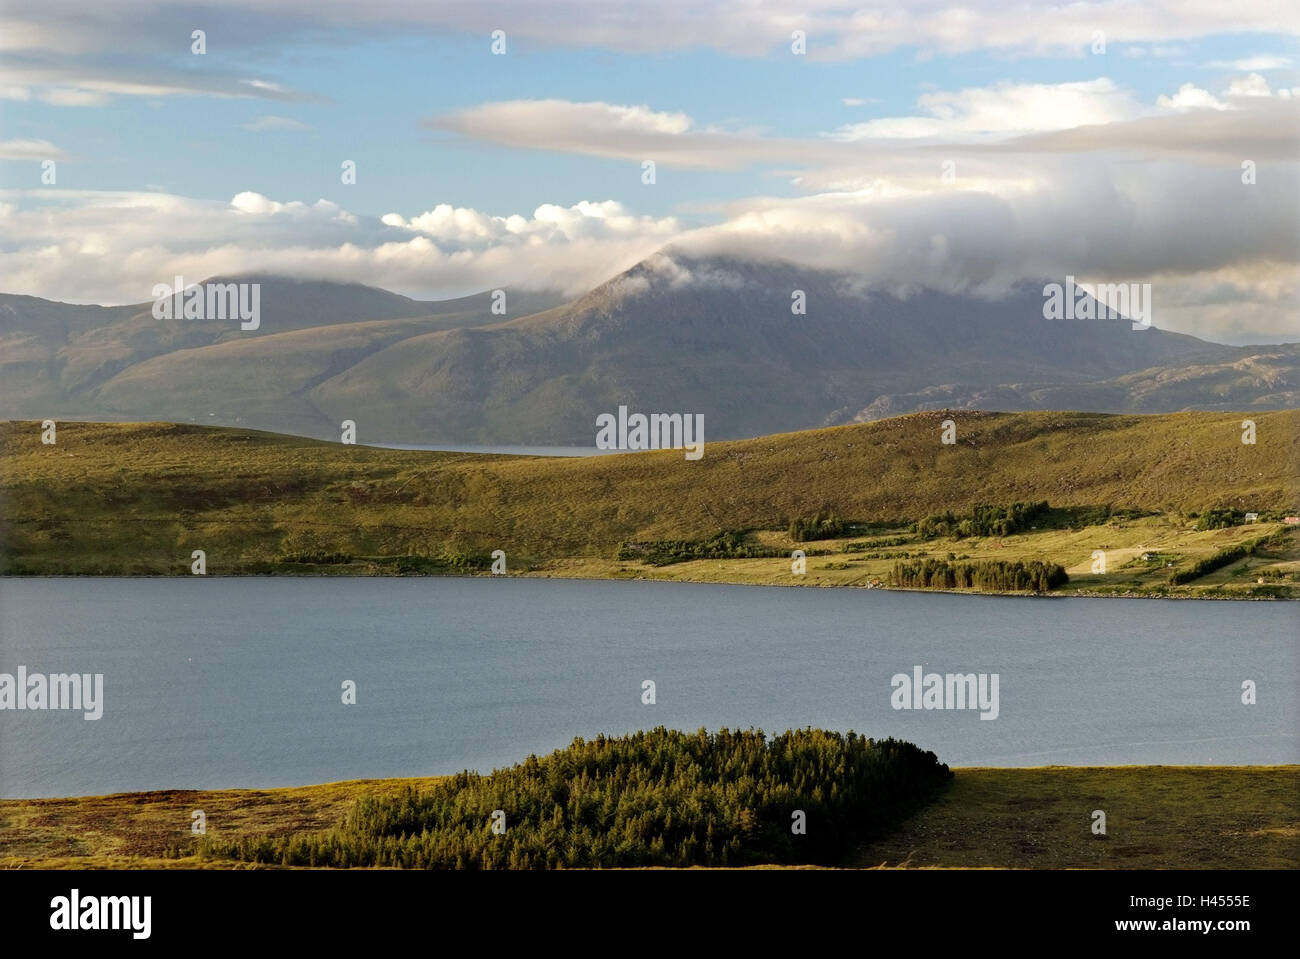 Great Britain, Scotland, north west, highland, fjord Little hole Broom, mountain, Ben More Coigach, Ullapol, Highland, nature, scenery, water, mountains, view, travelling area, heaven, clouds, width, distance, outside, deserted, Stock Photo